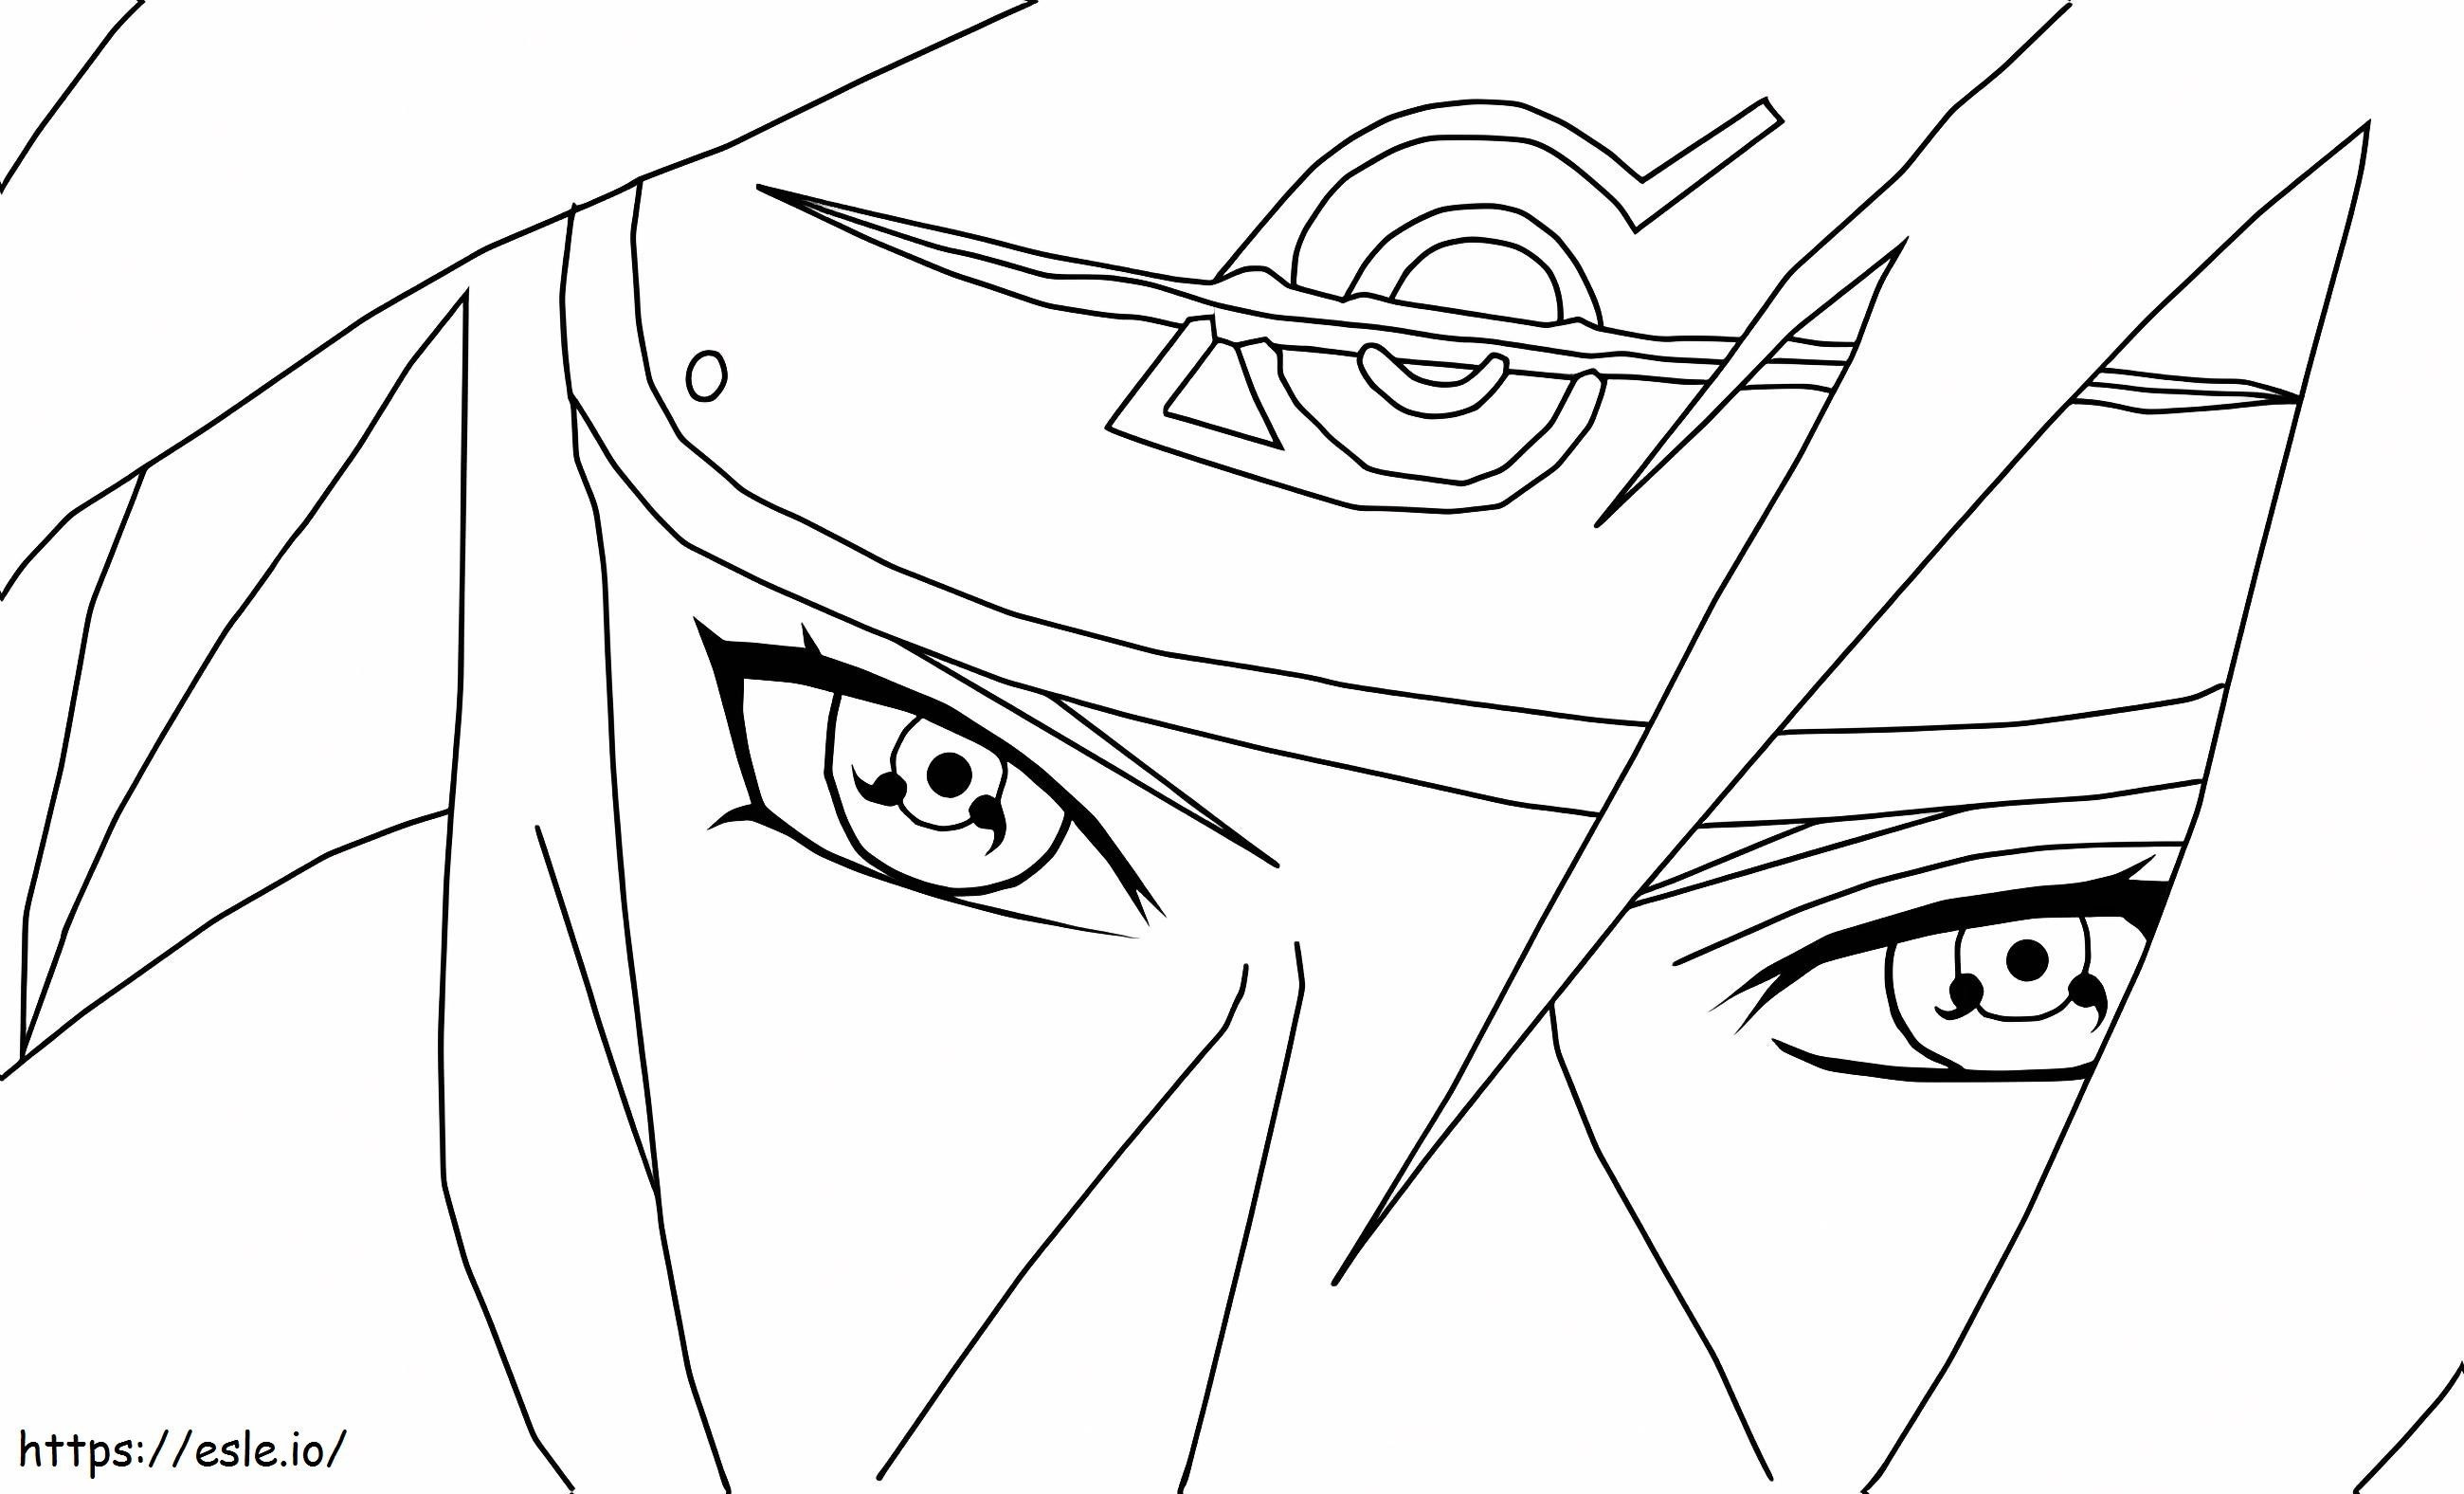 1528249892 Itachi Uchiha Drawing Easy 25A4 coloring page